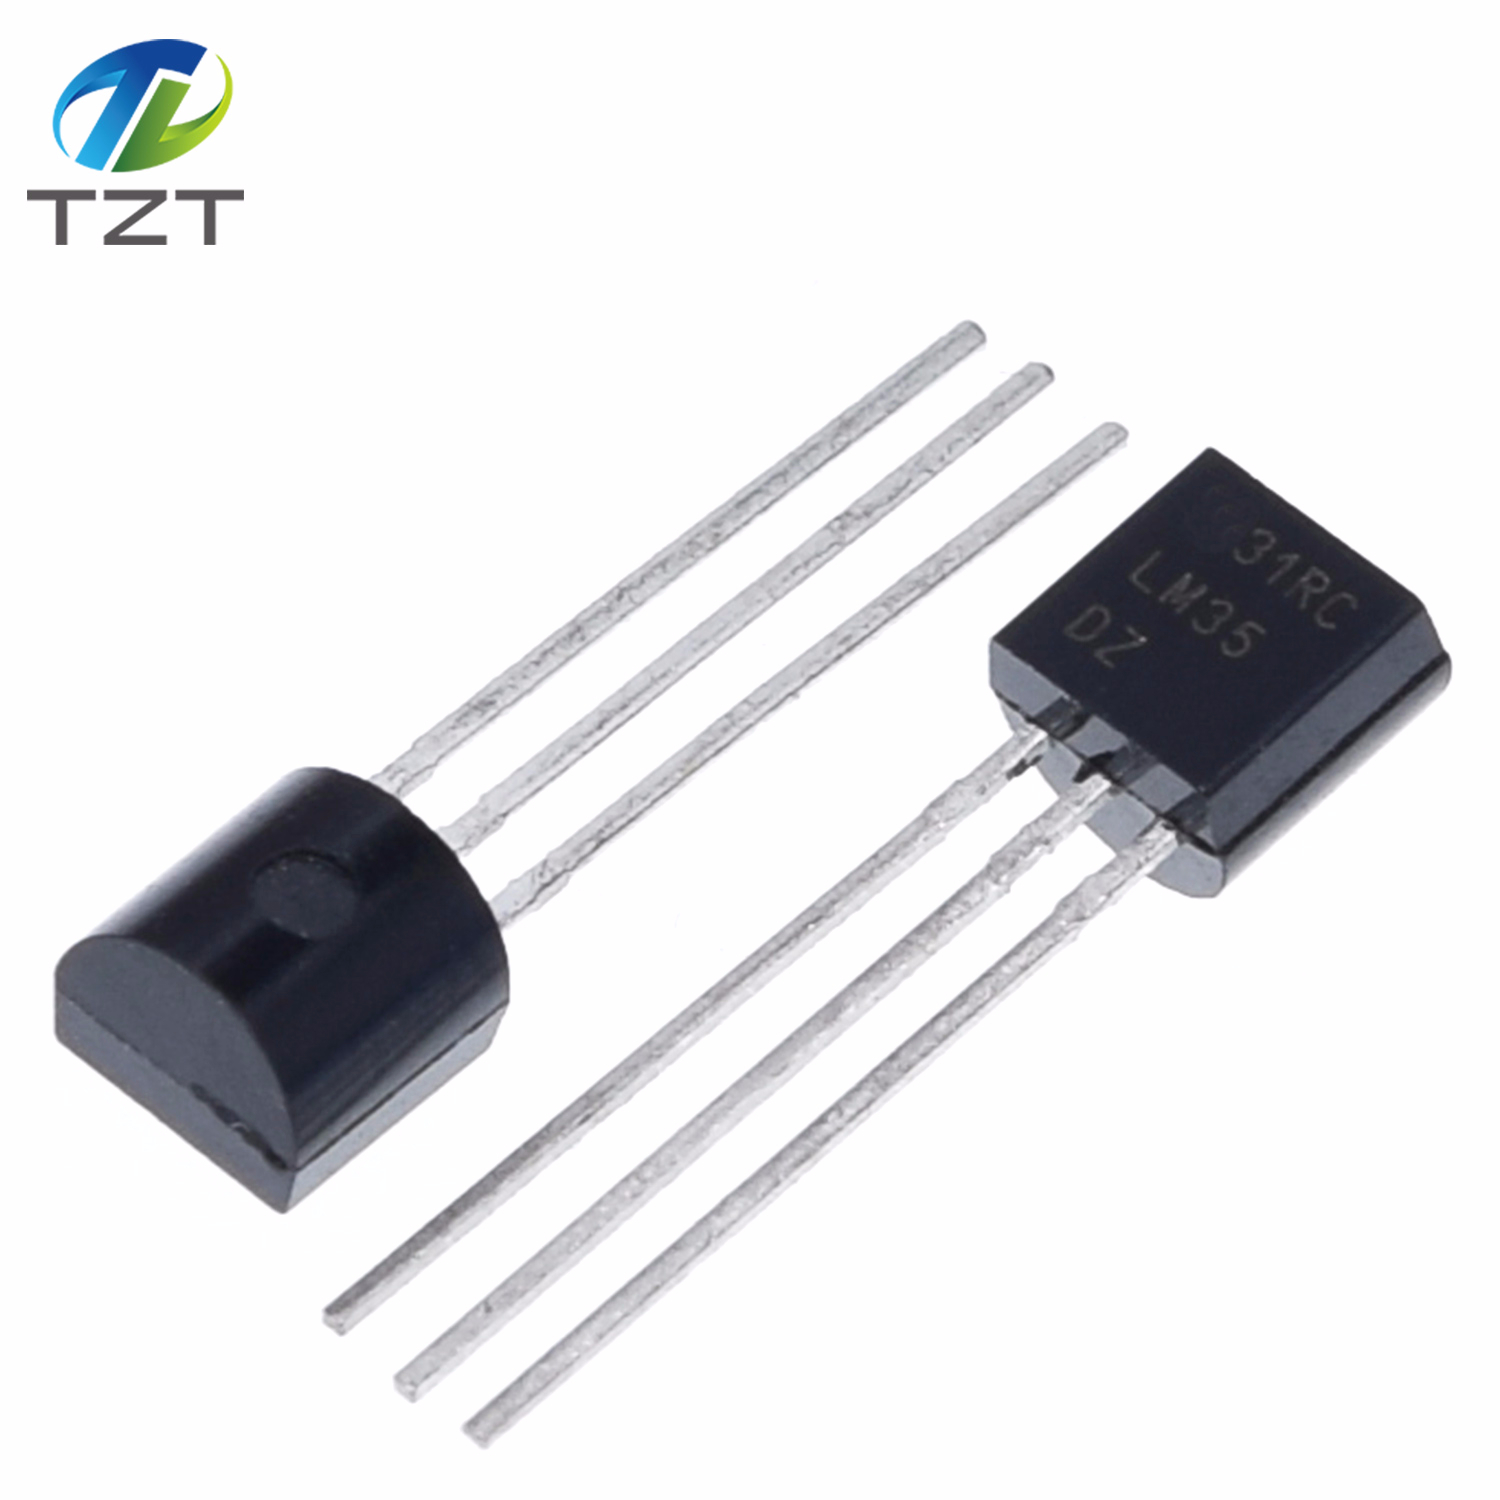 TZT Integrated Circuit Original LM35DZ TO-92 LM35 Precision Centigrade Temperature Sensor For IC Low Impedance In Stock